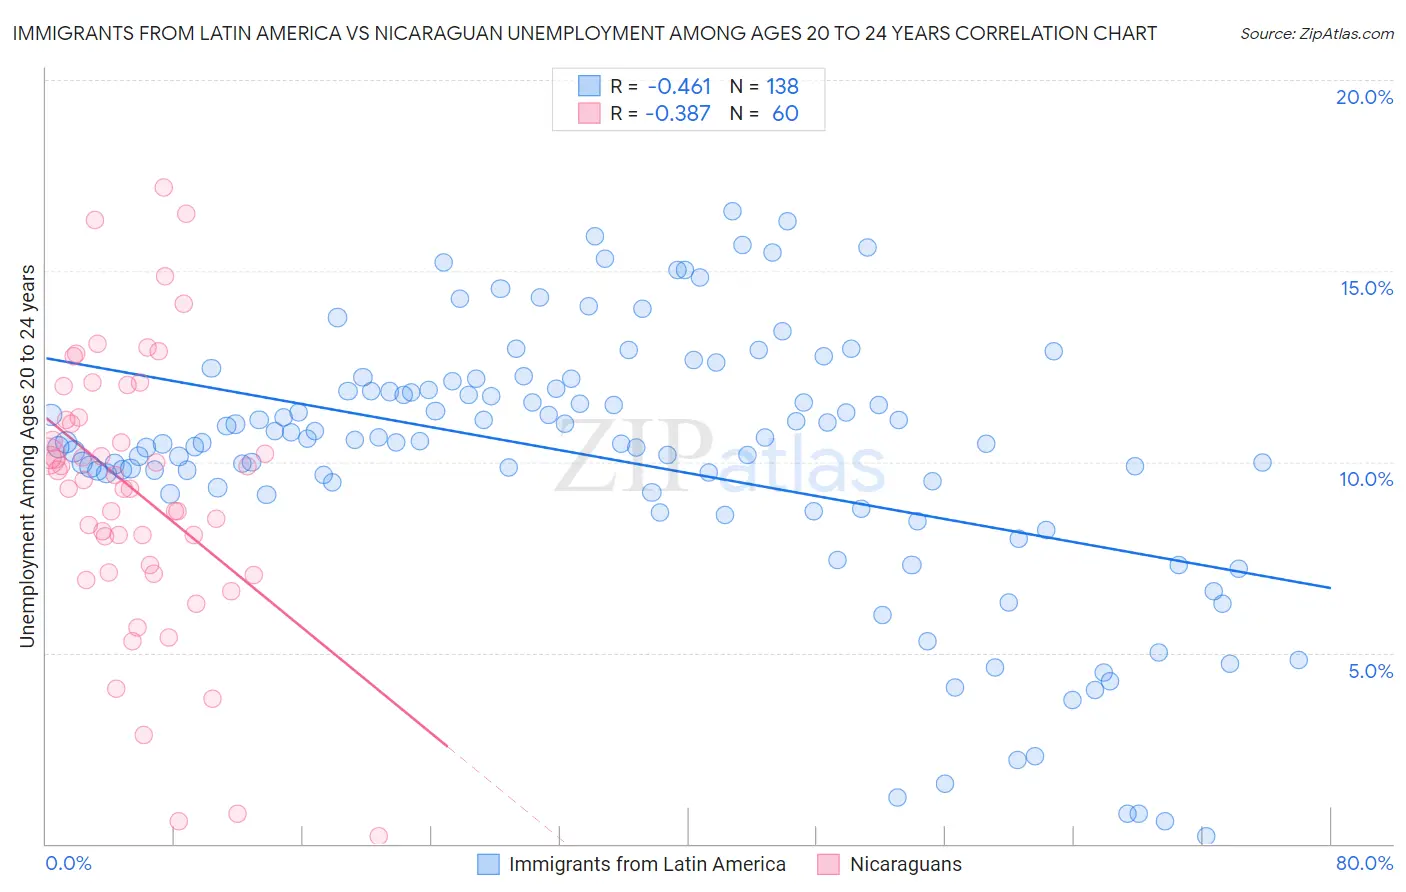 Immigrants from Latin America vs Nicaraguan Unemployment Among Ages 20 to 24 years